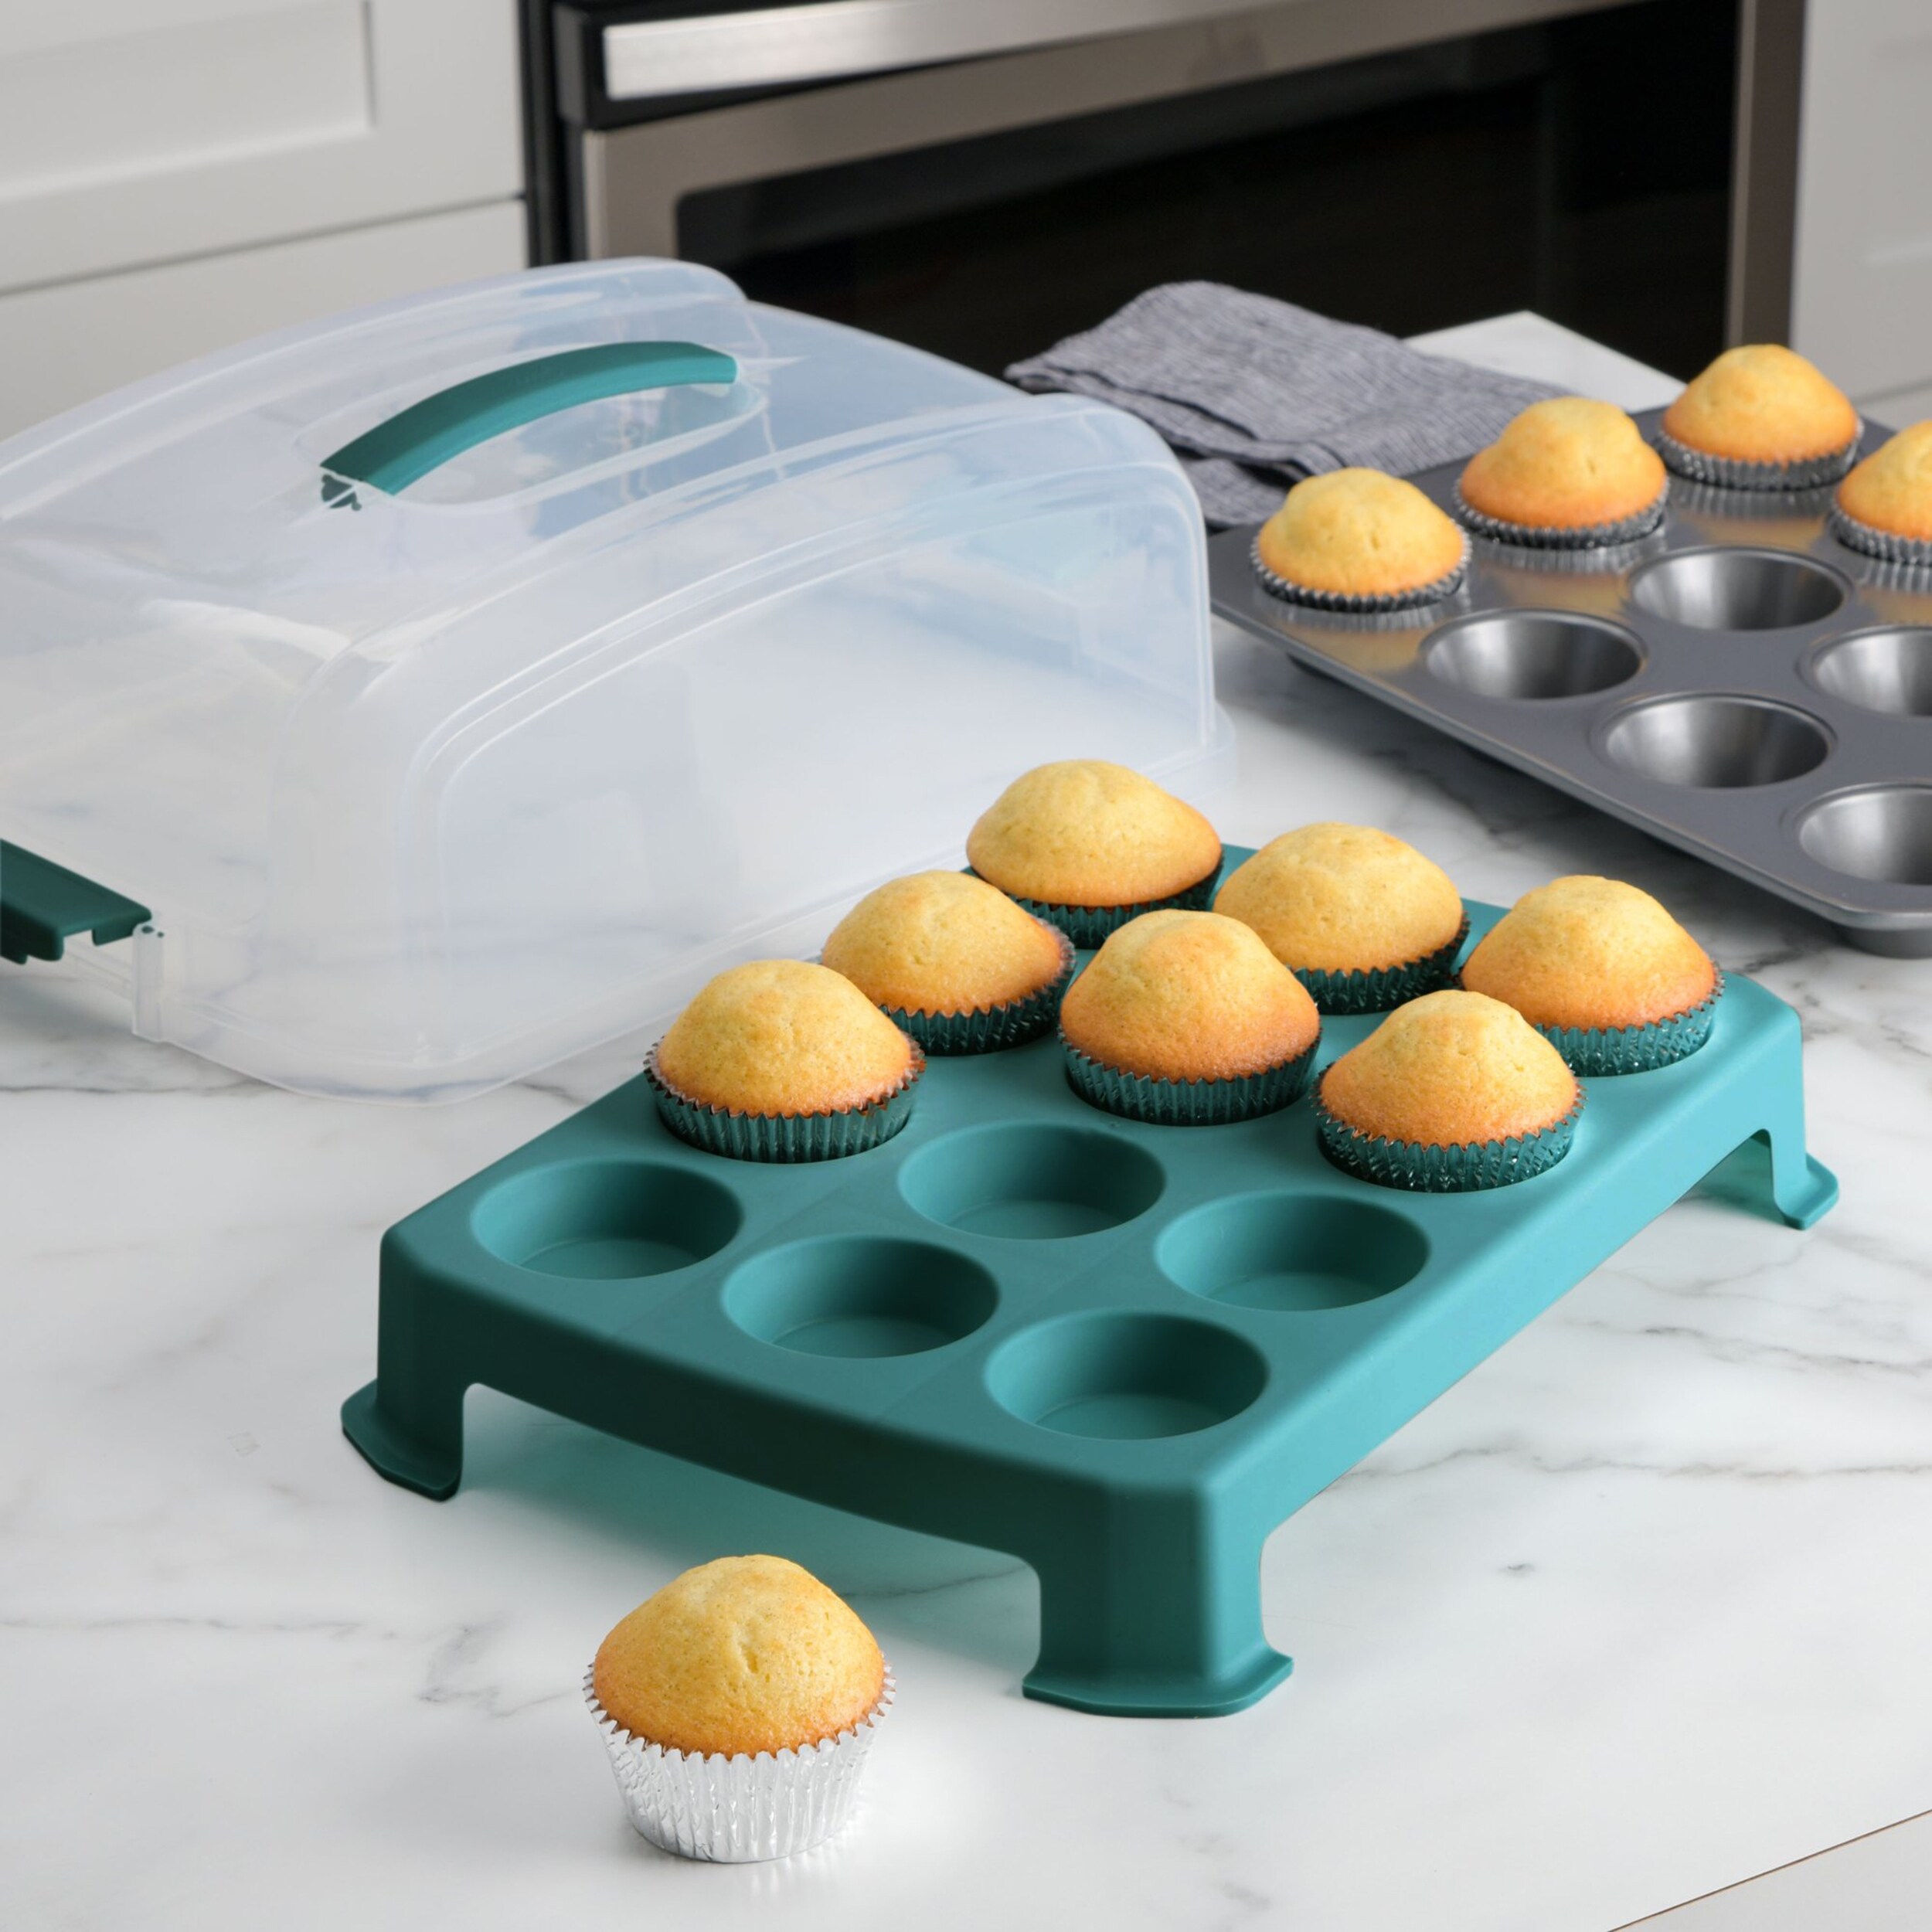 24 Cup Muffin Pan With Light Blue Carrier